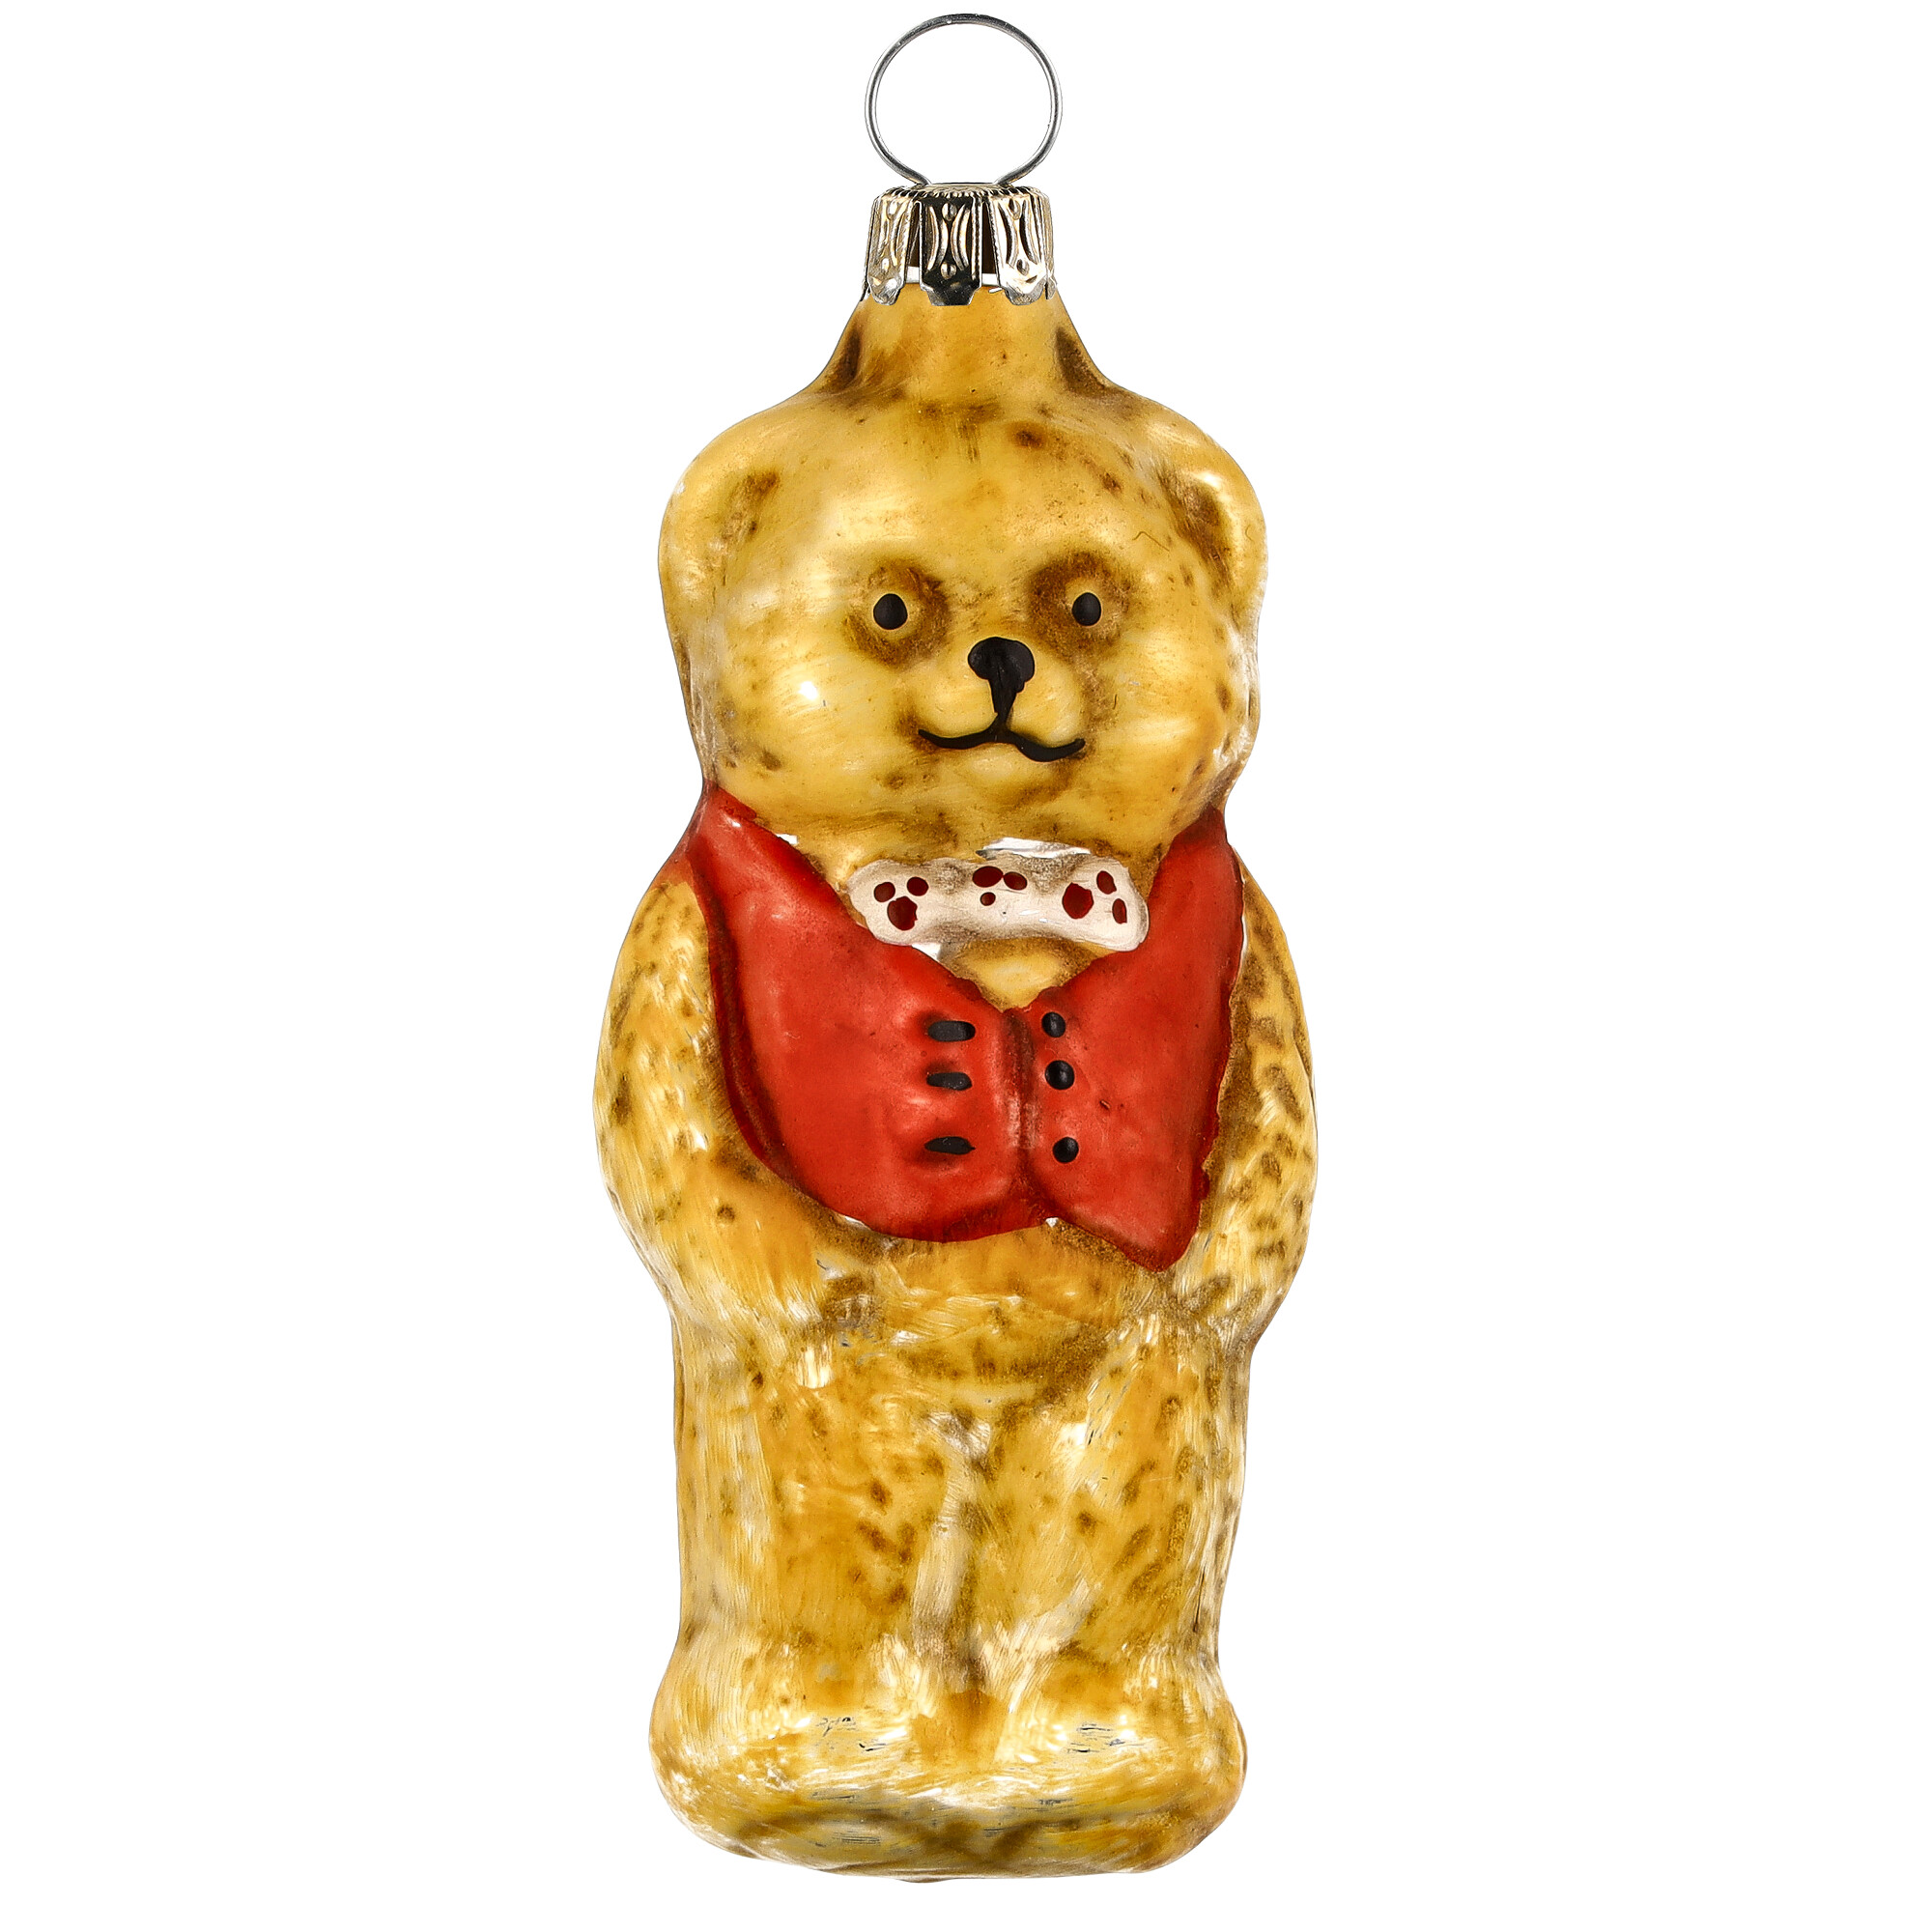 Retro Vintage style Christmas Glass Ornament - Bear with vest